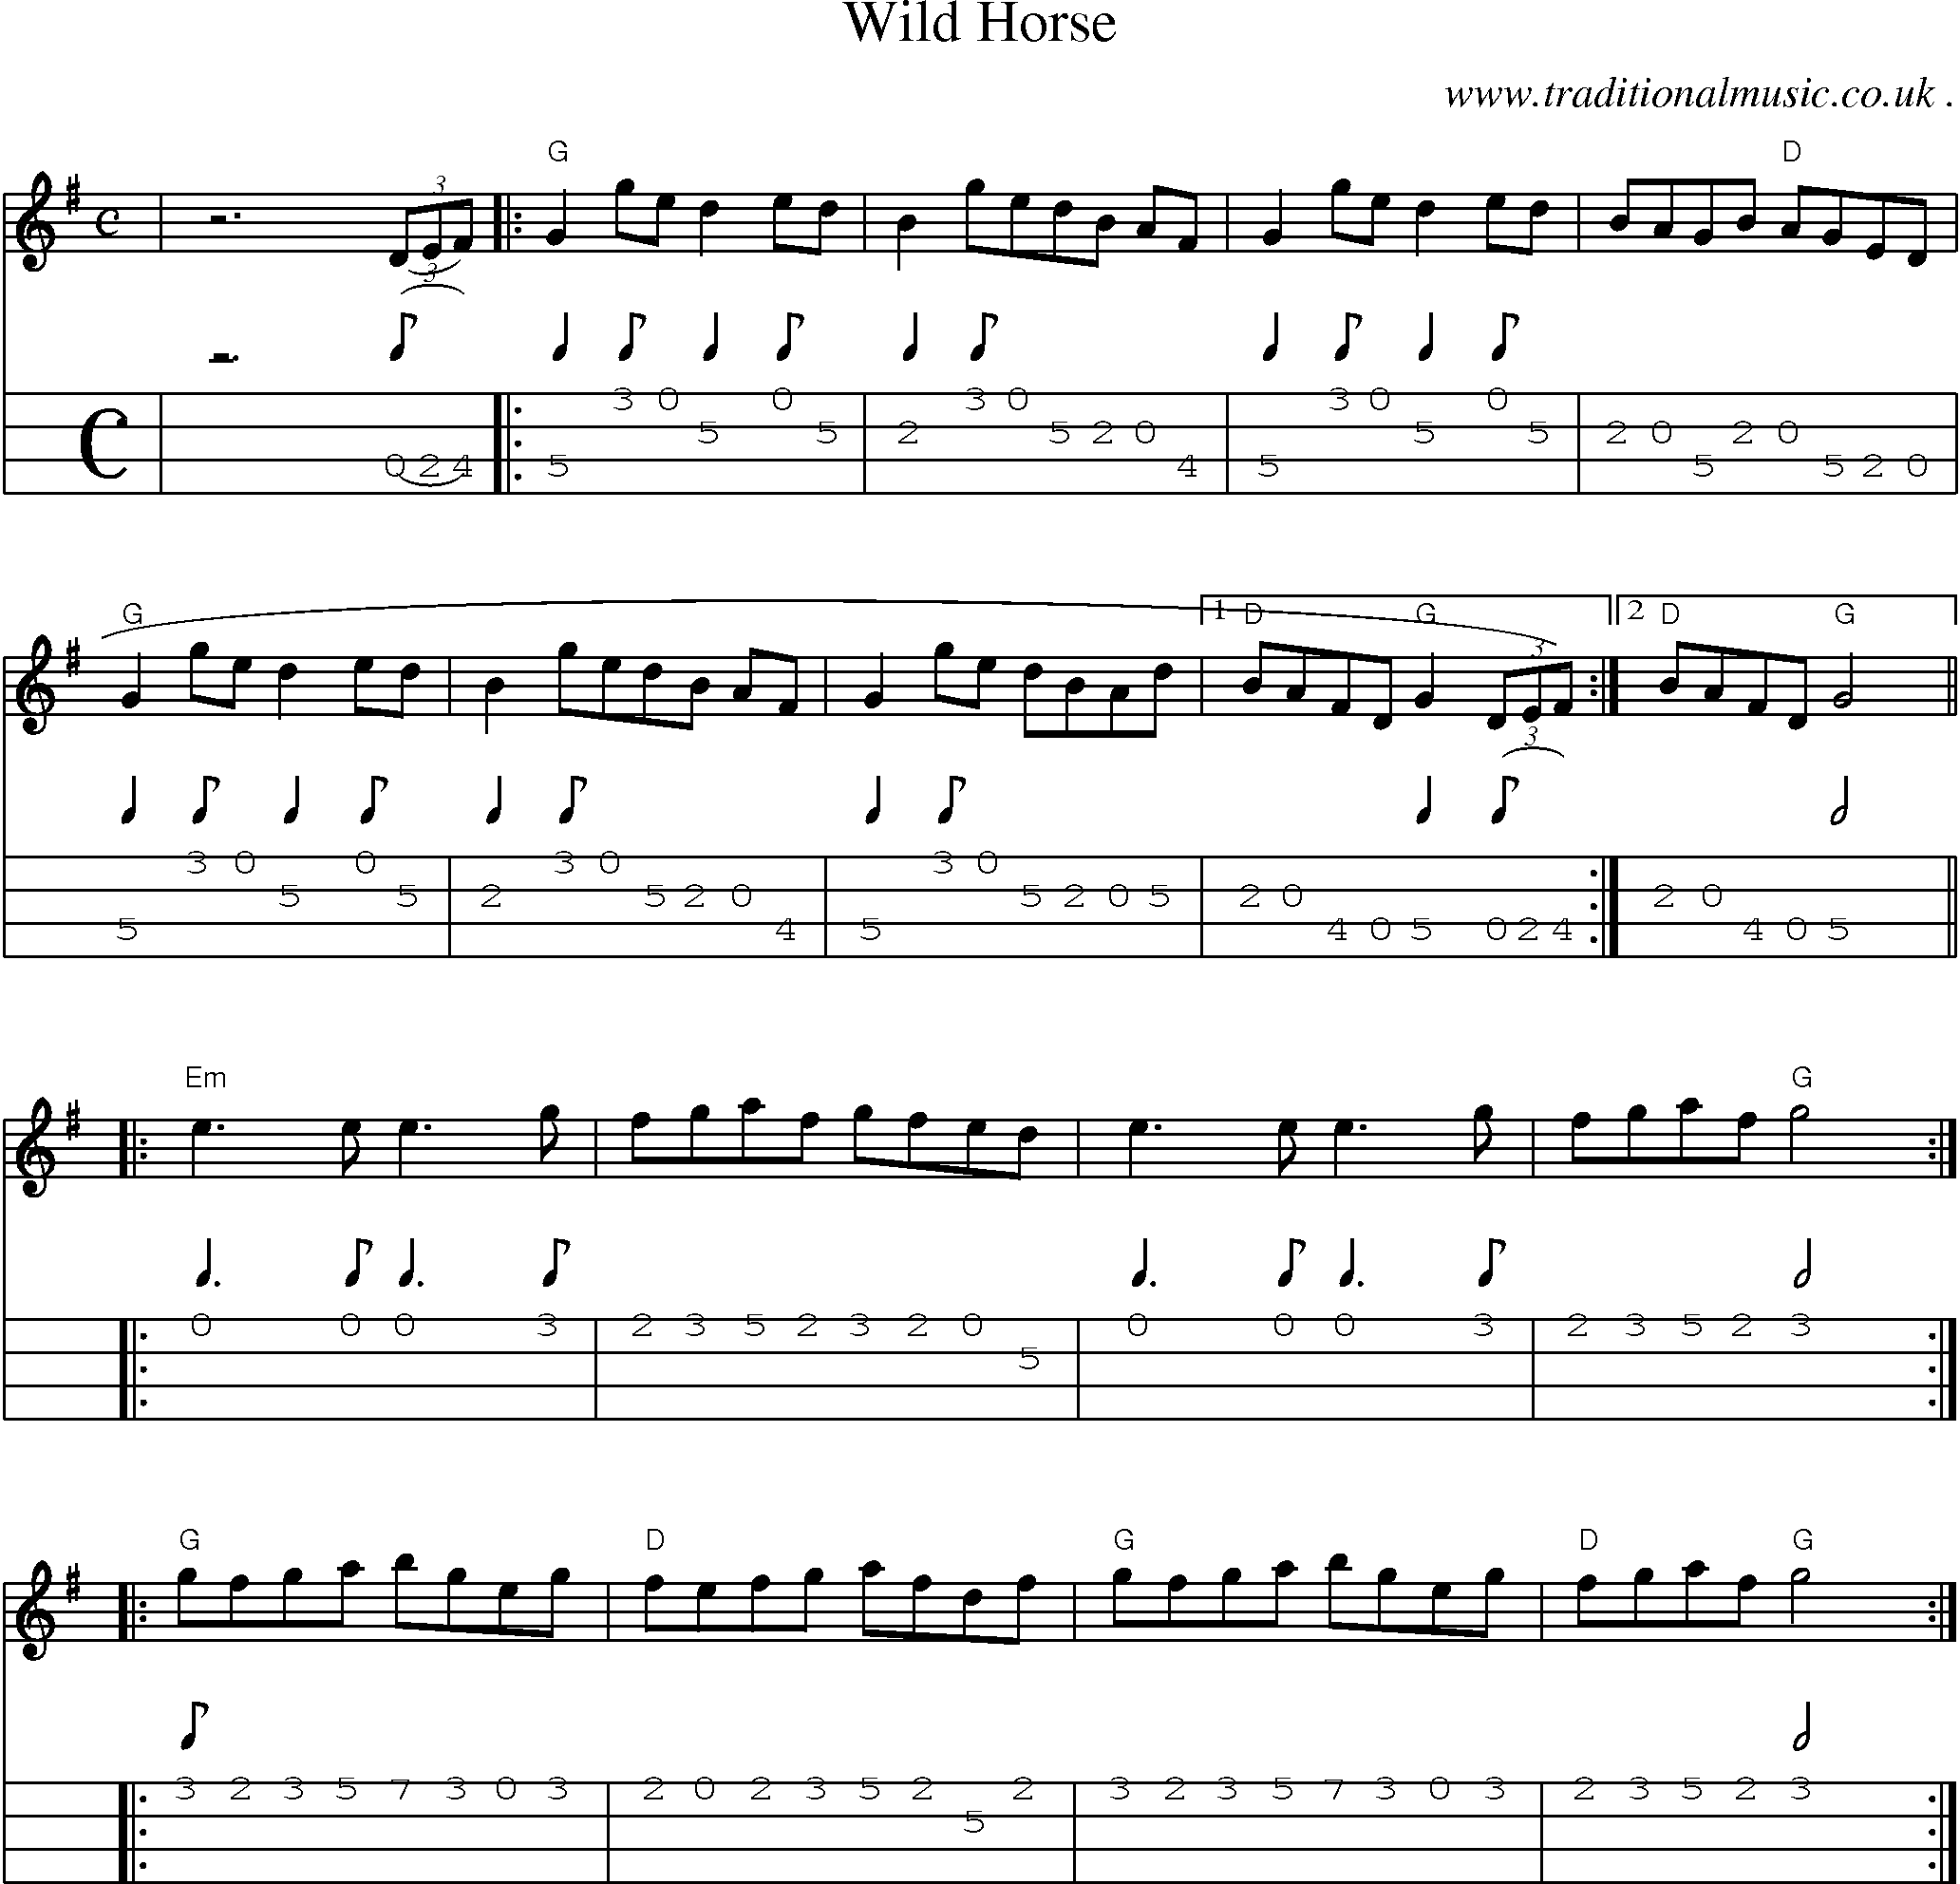 Music Score and Guitar Tabs for Wild Horse